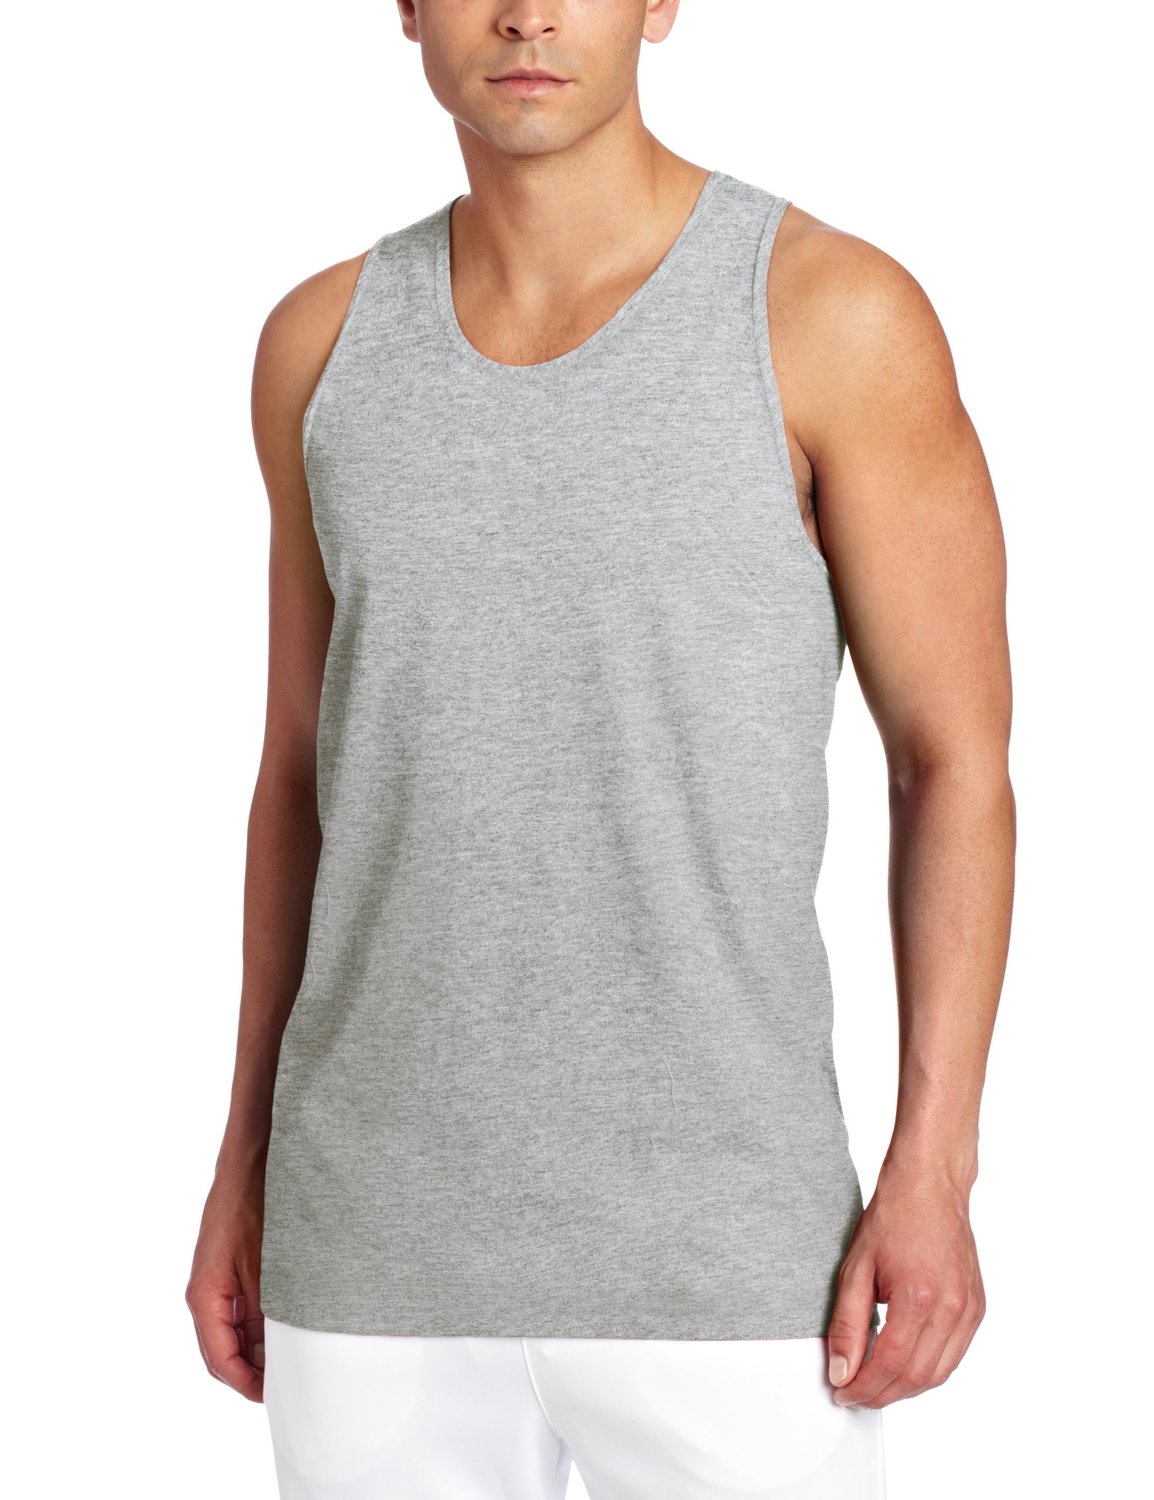 Russell Athletic Men's Basic Cotton Tank